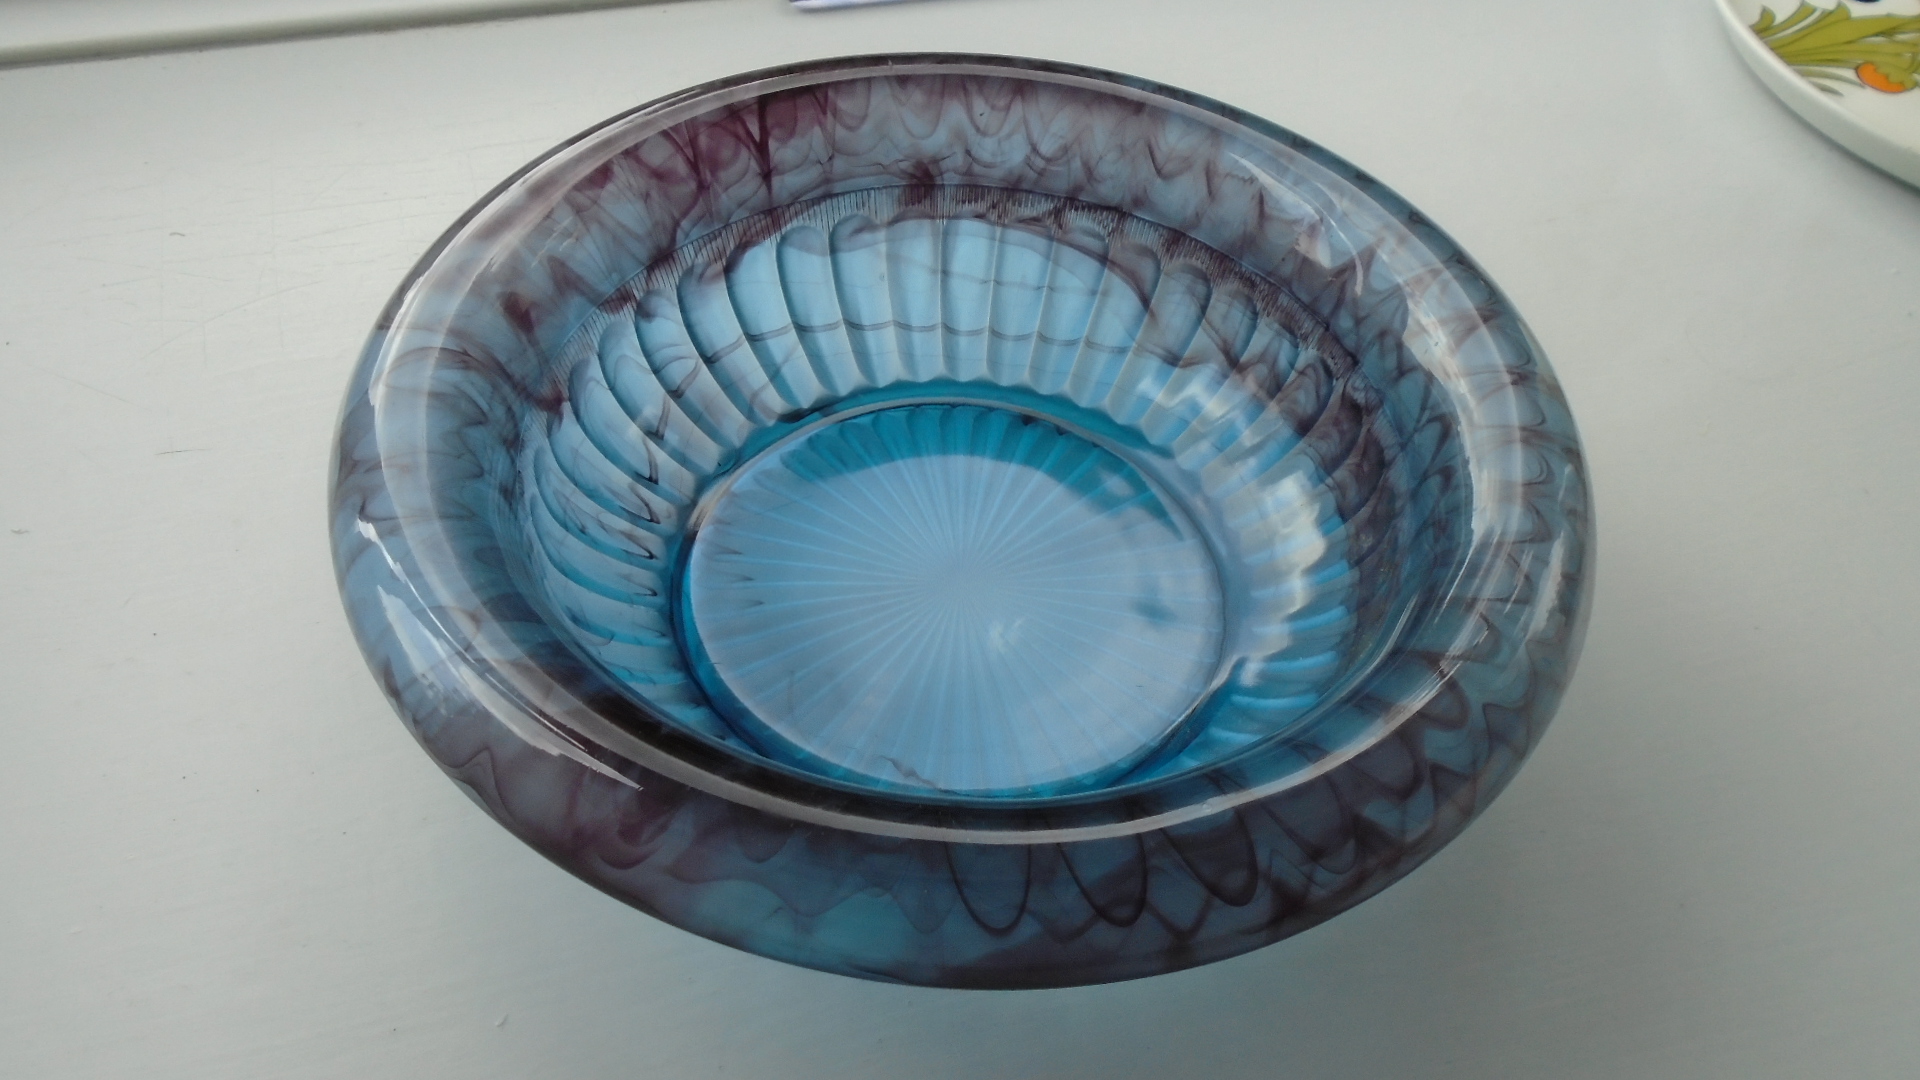 Fine example of a Vintage 1930s Art Deco Davidson Cloud Glass Bowl Pattern No.1910MD in Blue.